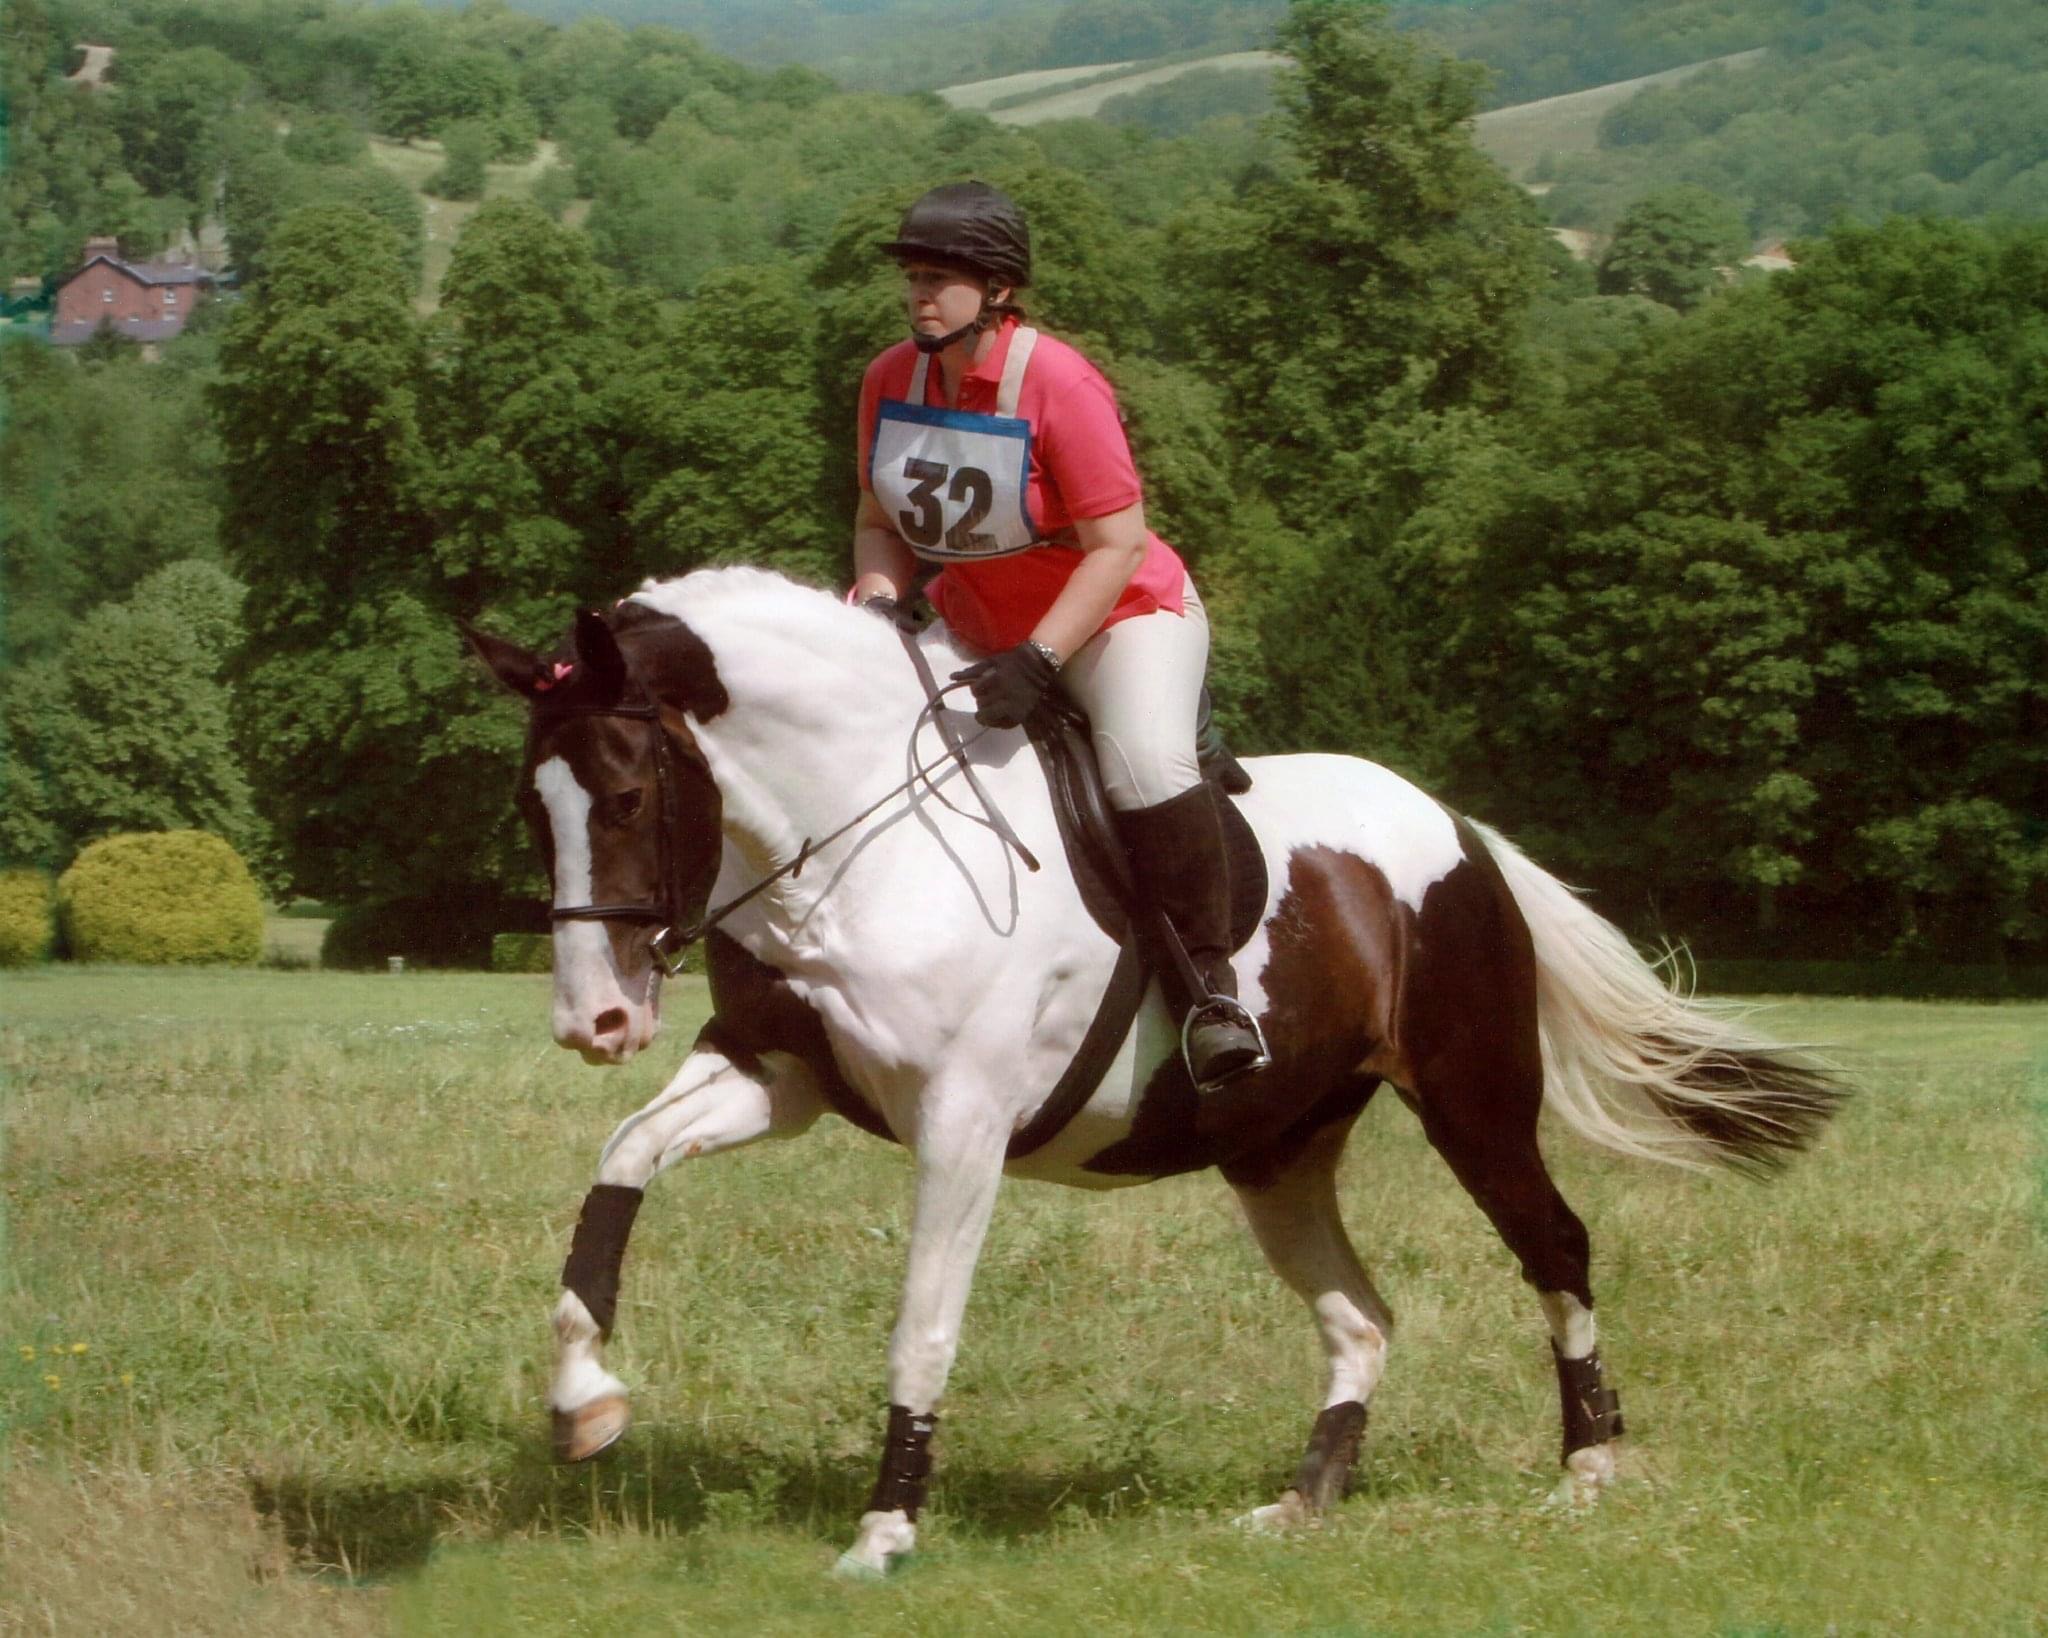 Black and white horse cantering with lady rider in Pink top and beige jodphurs